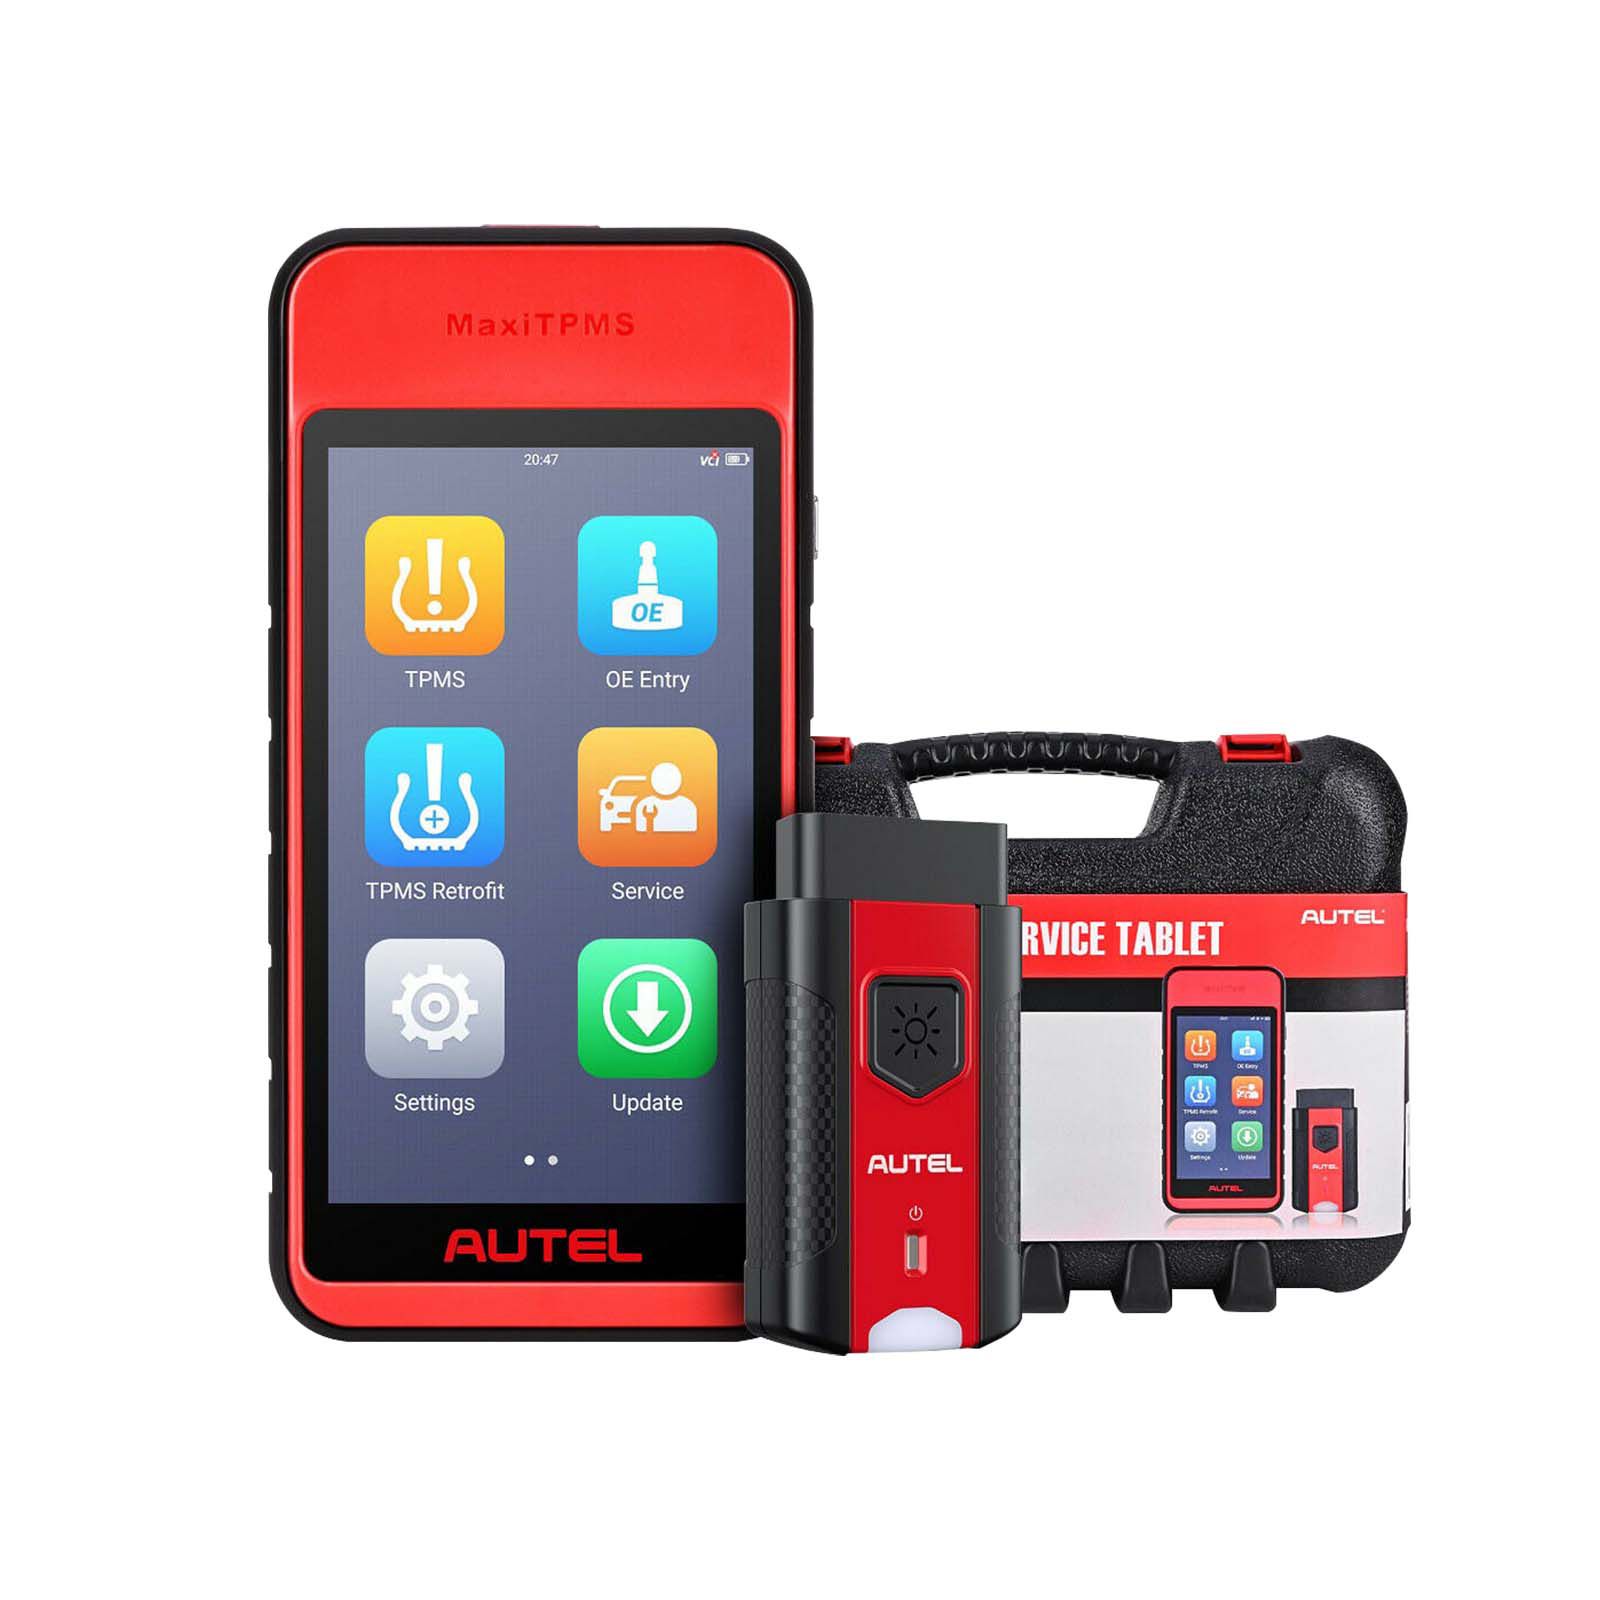 Autel MaxiTPMS ITS600E TPMS Relearn Tool Activate/Relearn All Sensors TPMS Diagnostic Scanner Compatible with TBE200/TBE100